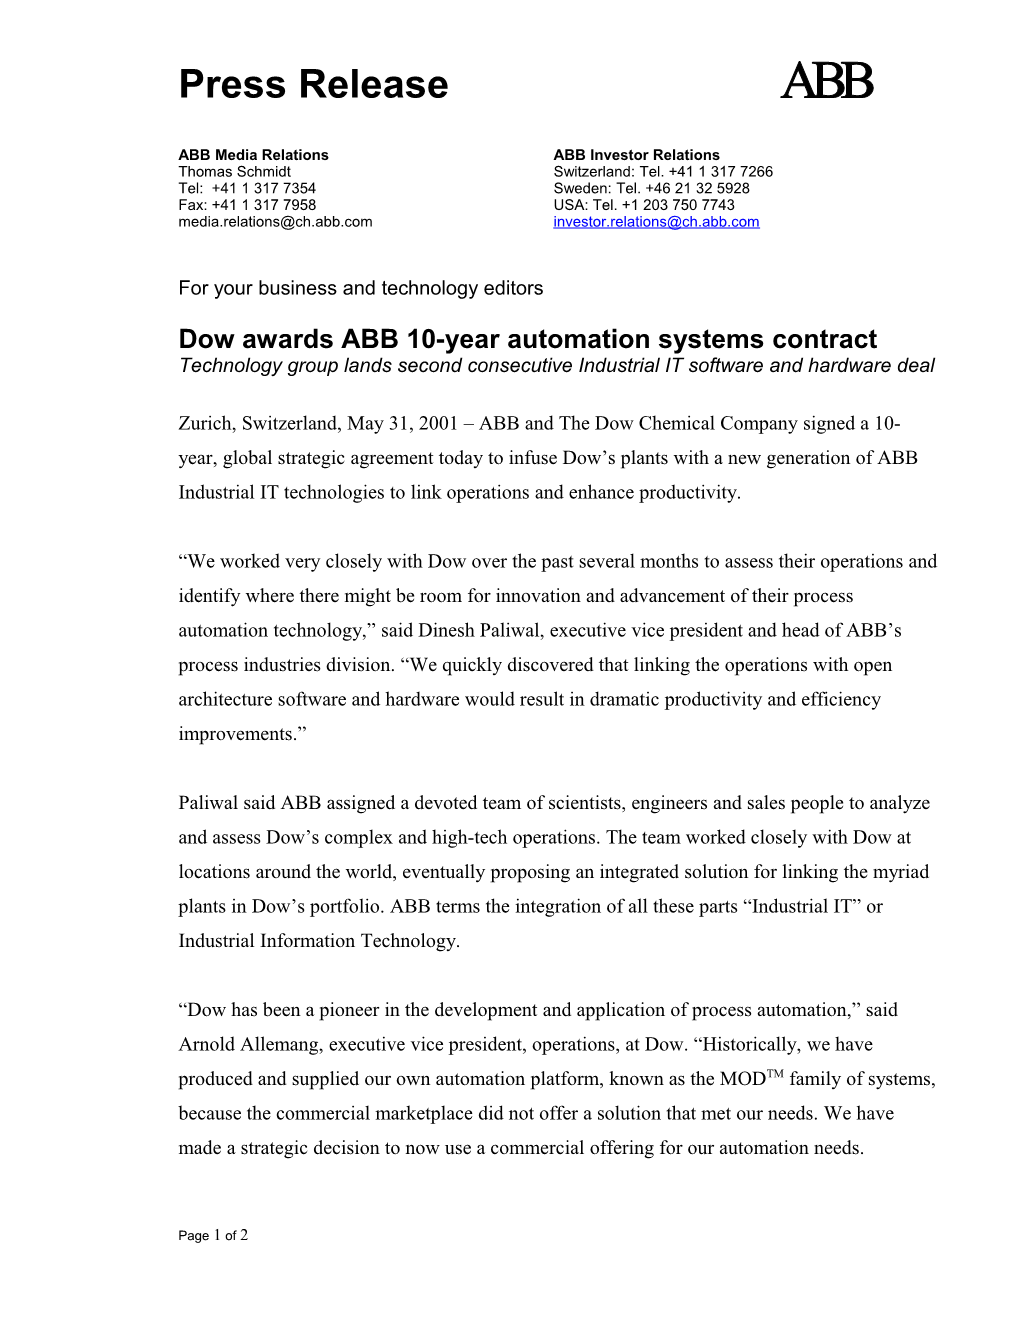 Dow Awards ABB 10-Year Automation Systems Contract